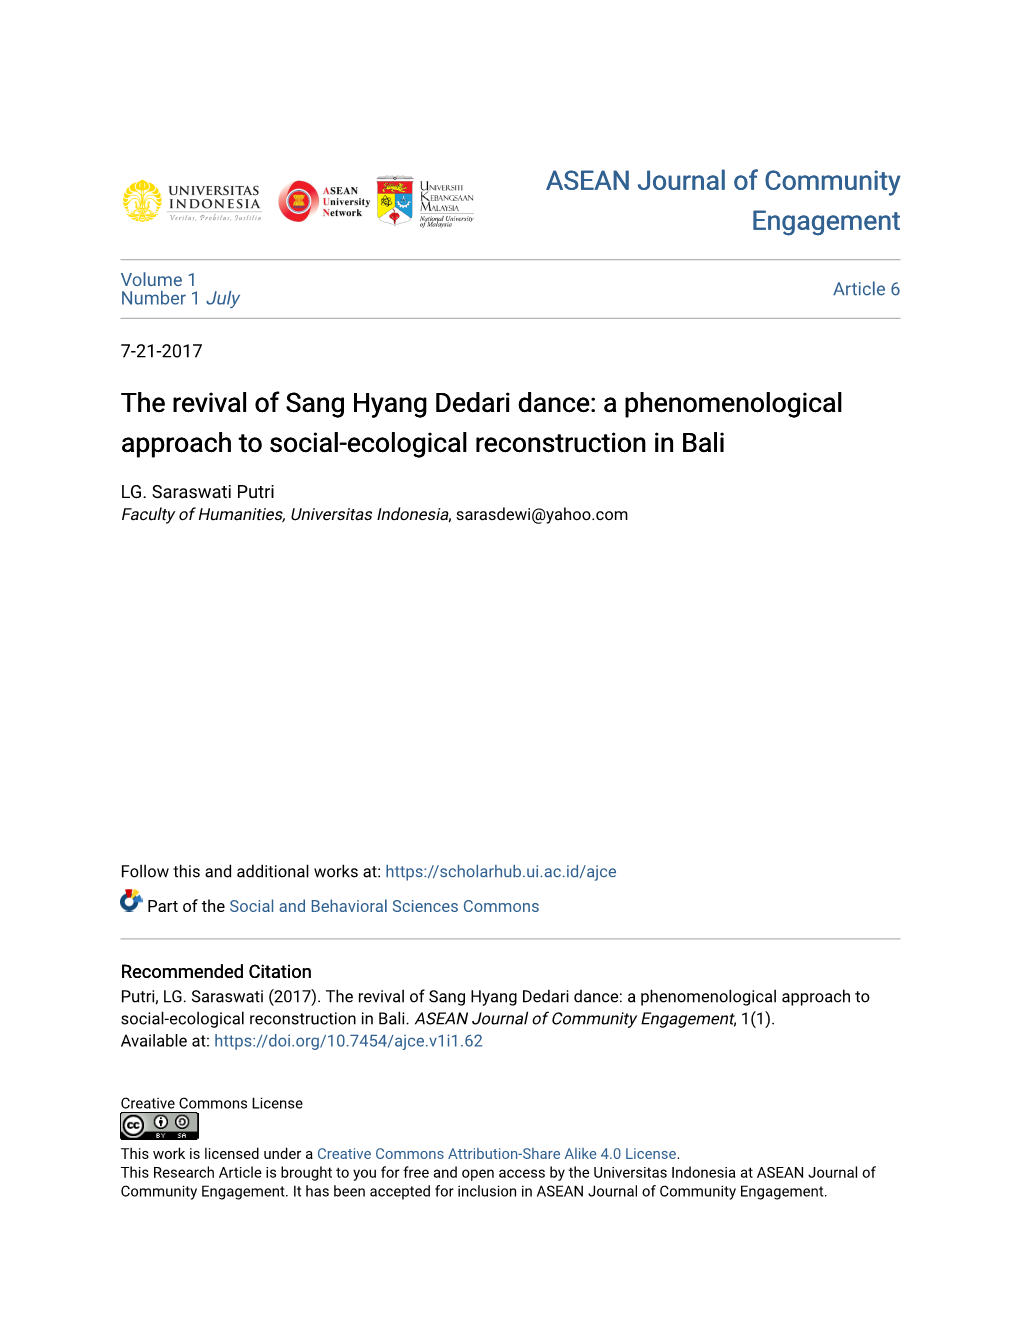 The Revival of Sang Hyang Dedari Dance: a Phenomenological Approach to Social-Ecological Reconstruction in Bali